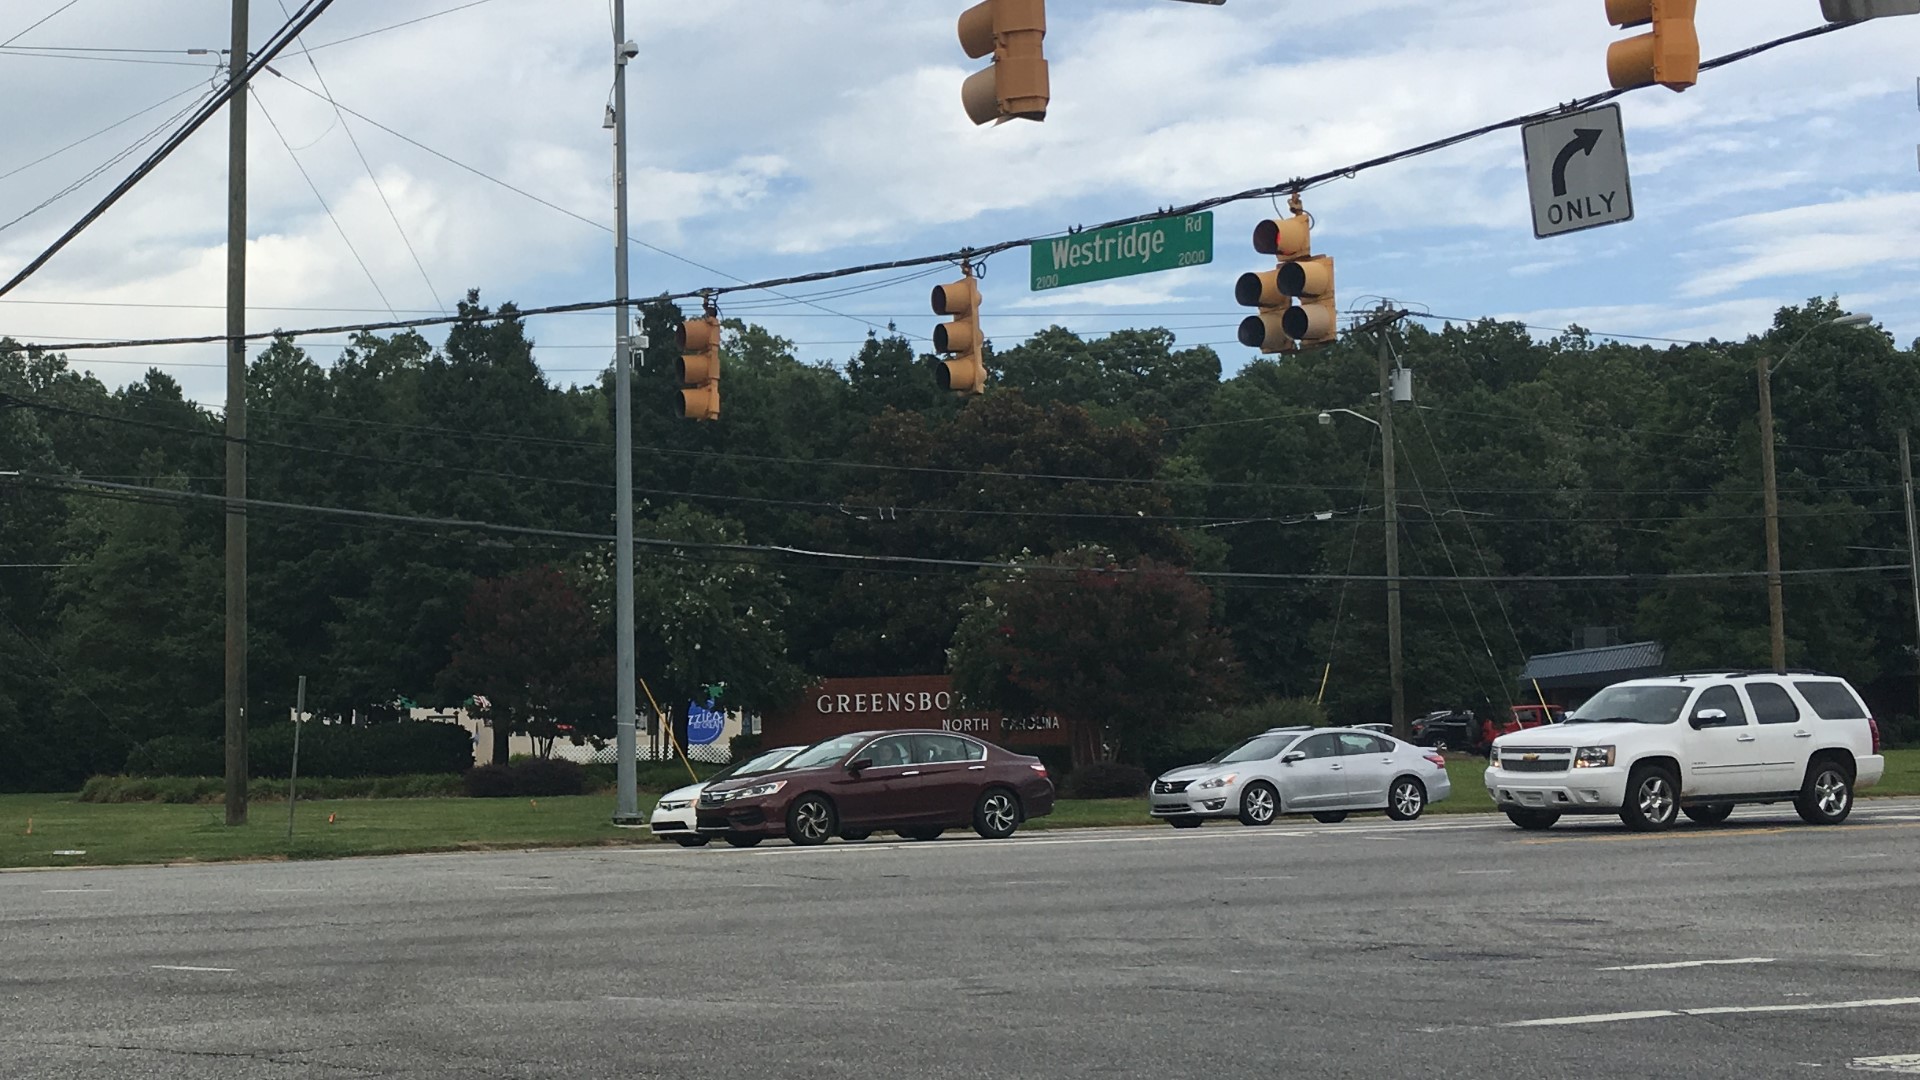 The City of Greensboro says Battleground Avenue will be widened to make room for more lanes, sidewalks and another traffic light at the Westridge Shopping Center.